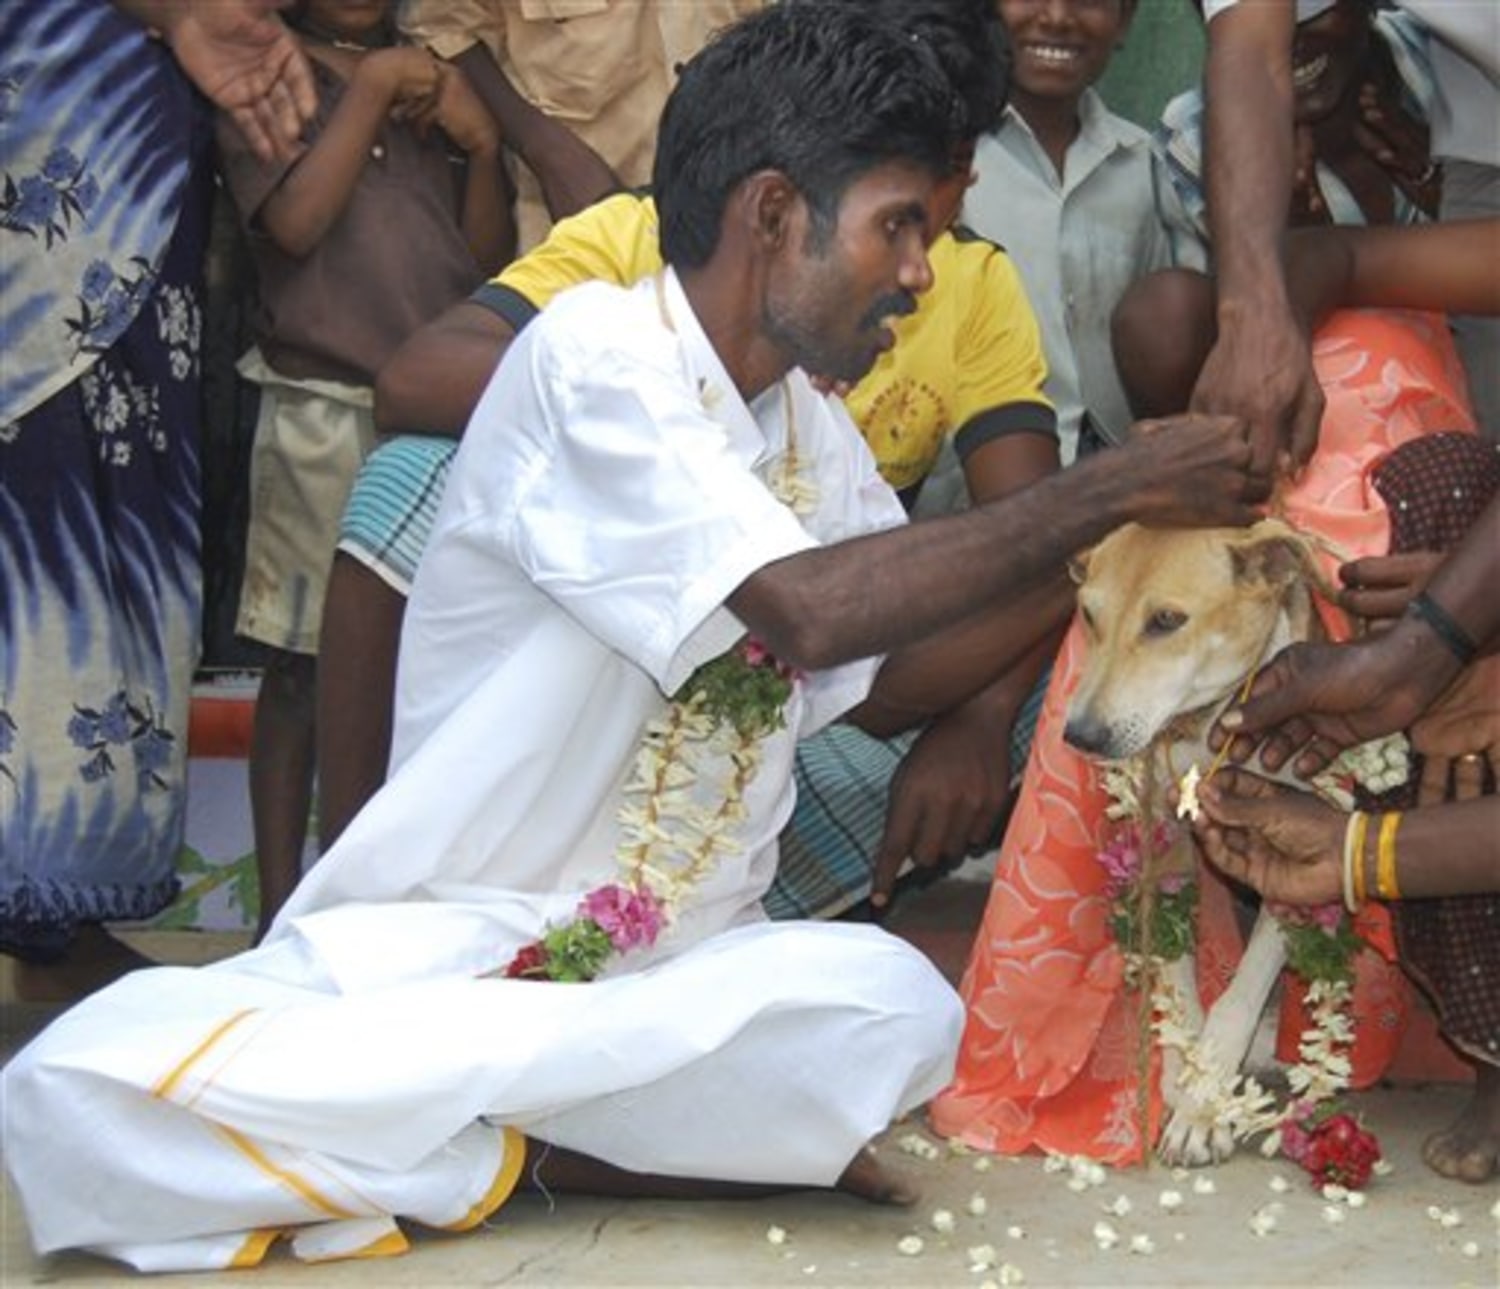 Man in India marries dog as atonement